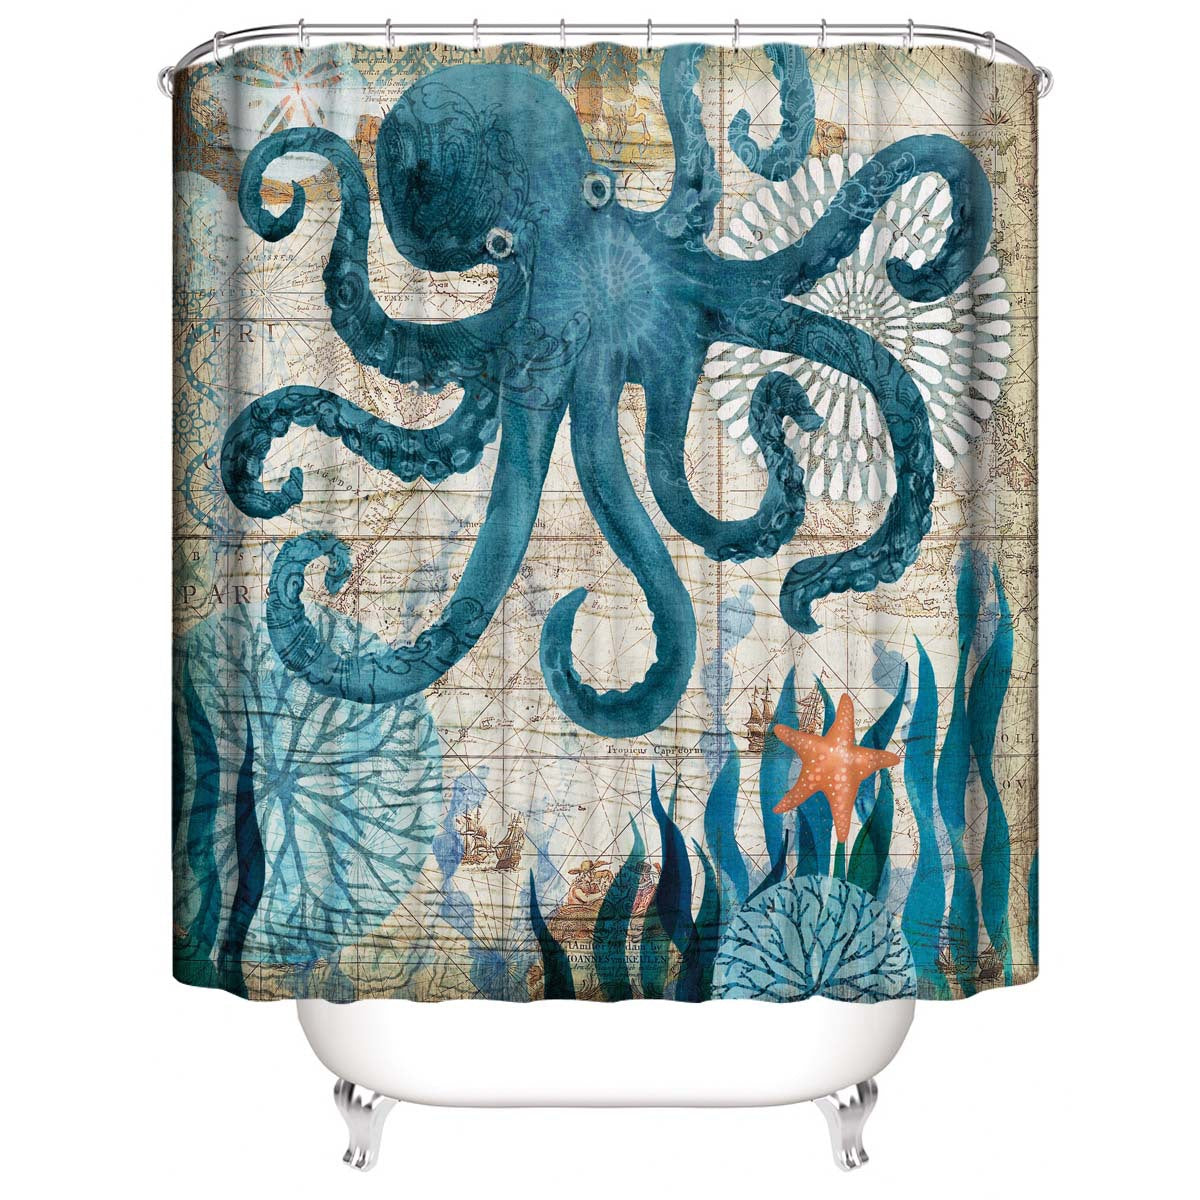 3D Octopus Fabric Shower Curtains-STYLEGOING